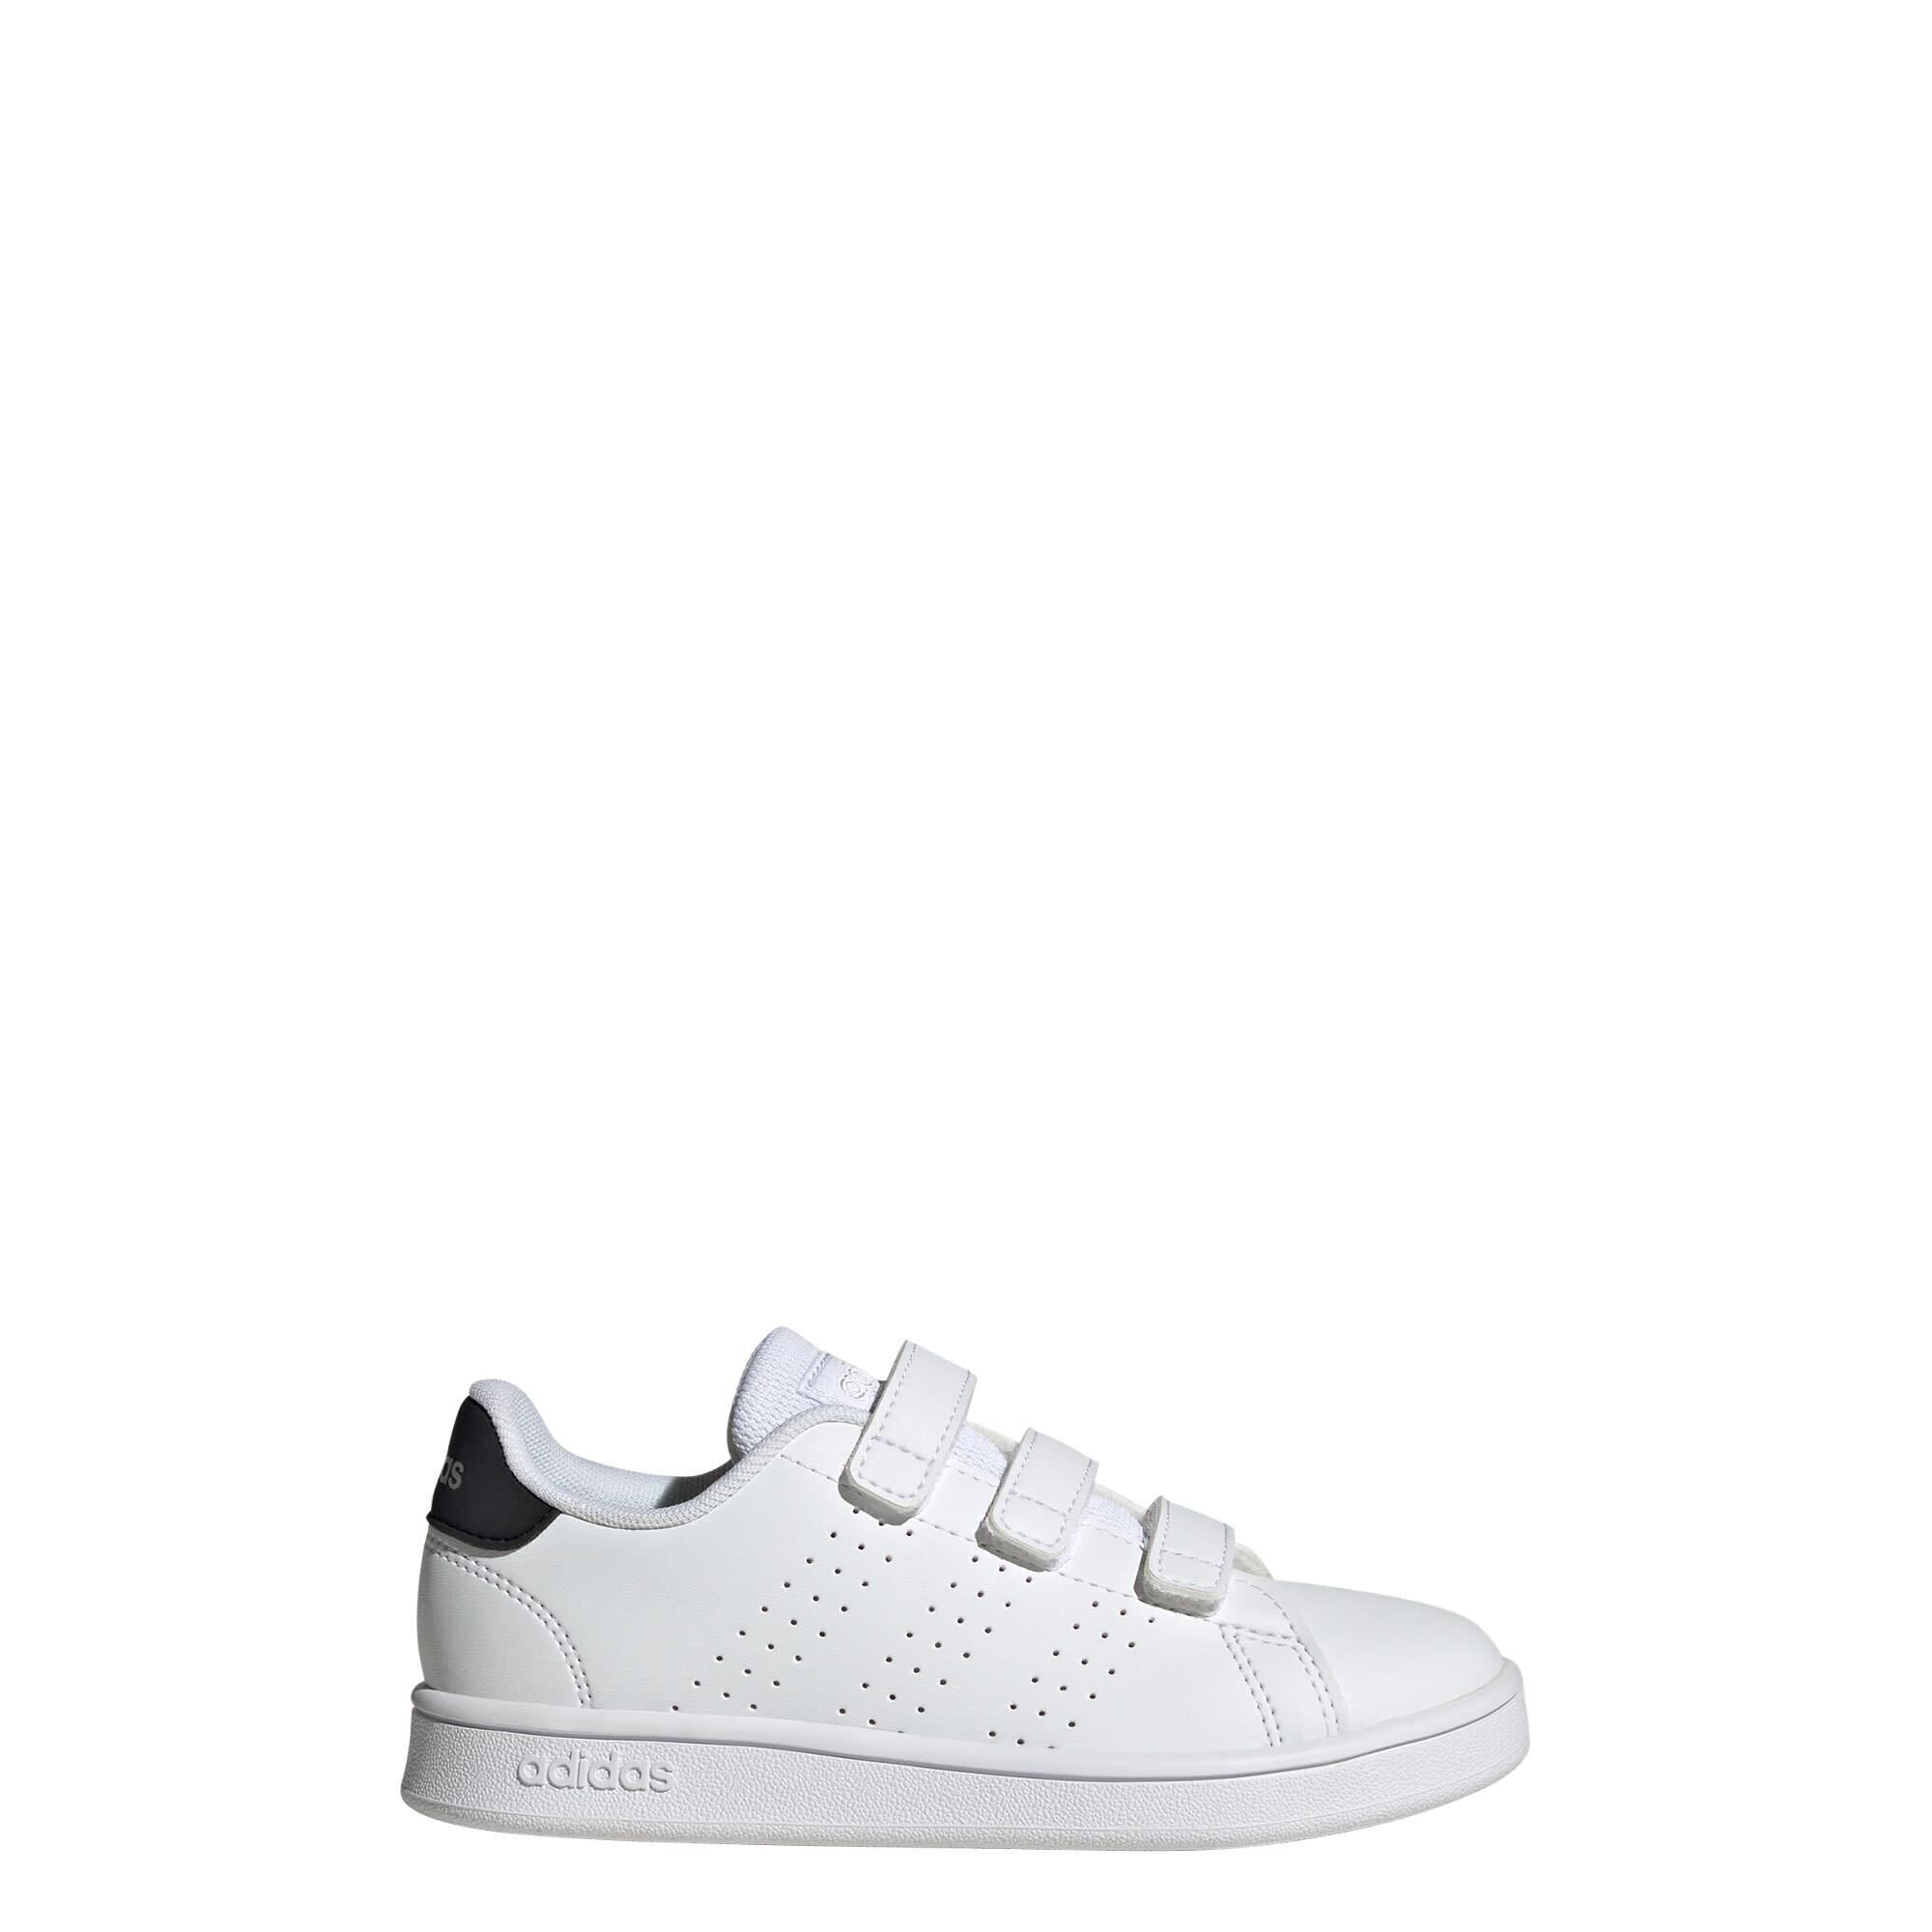 ADIDAS Advantage Court Lifestyle Hook-and-Loop Shoes